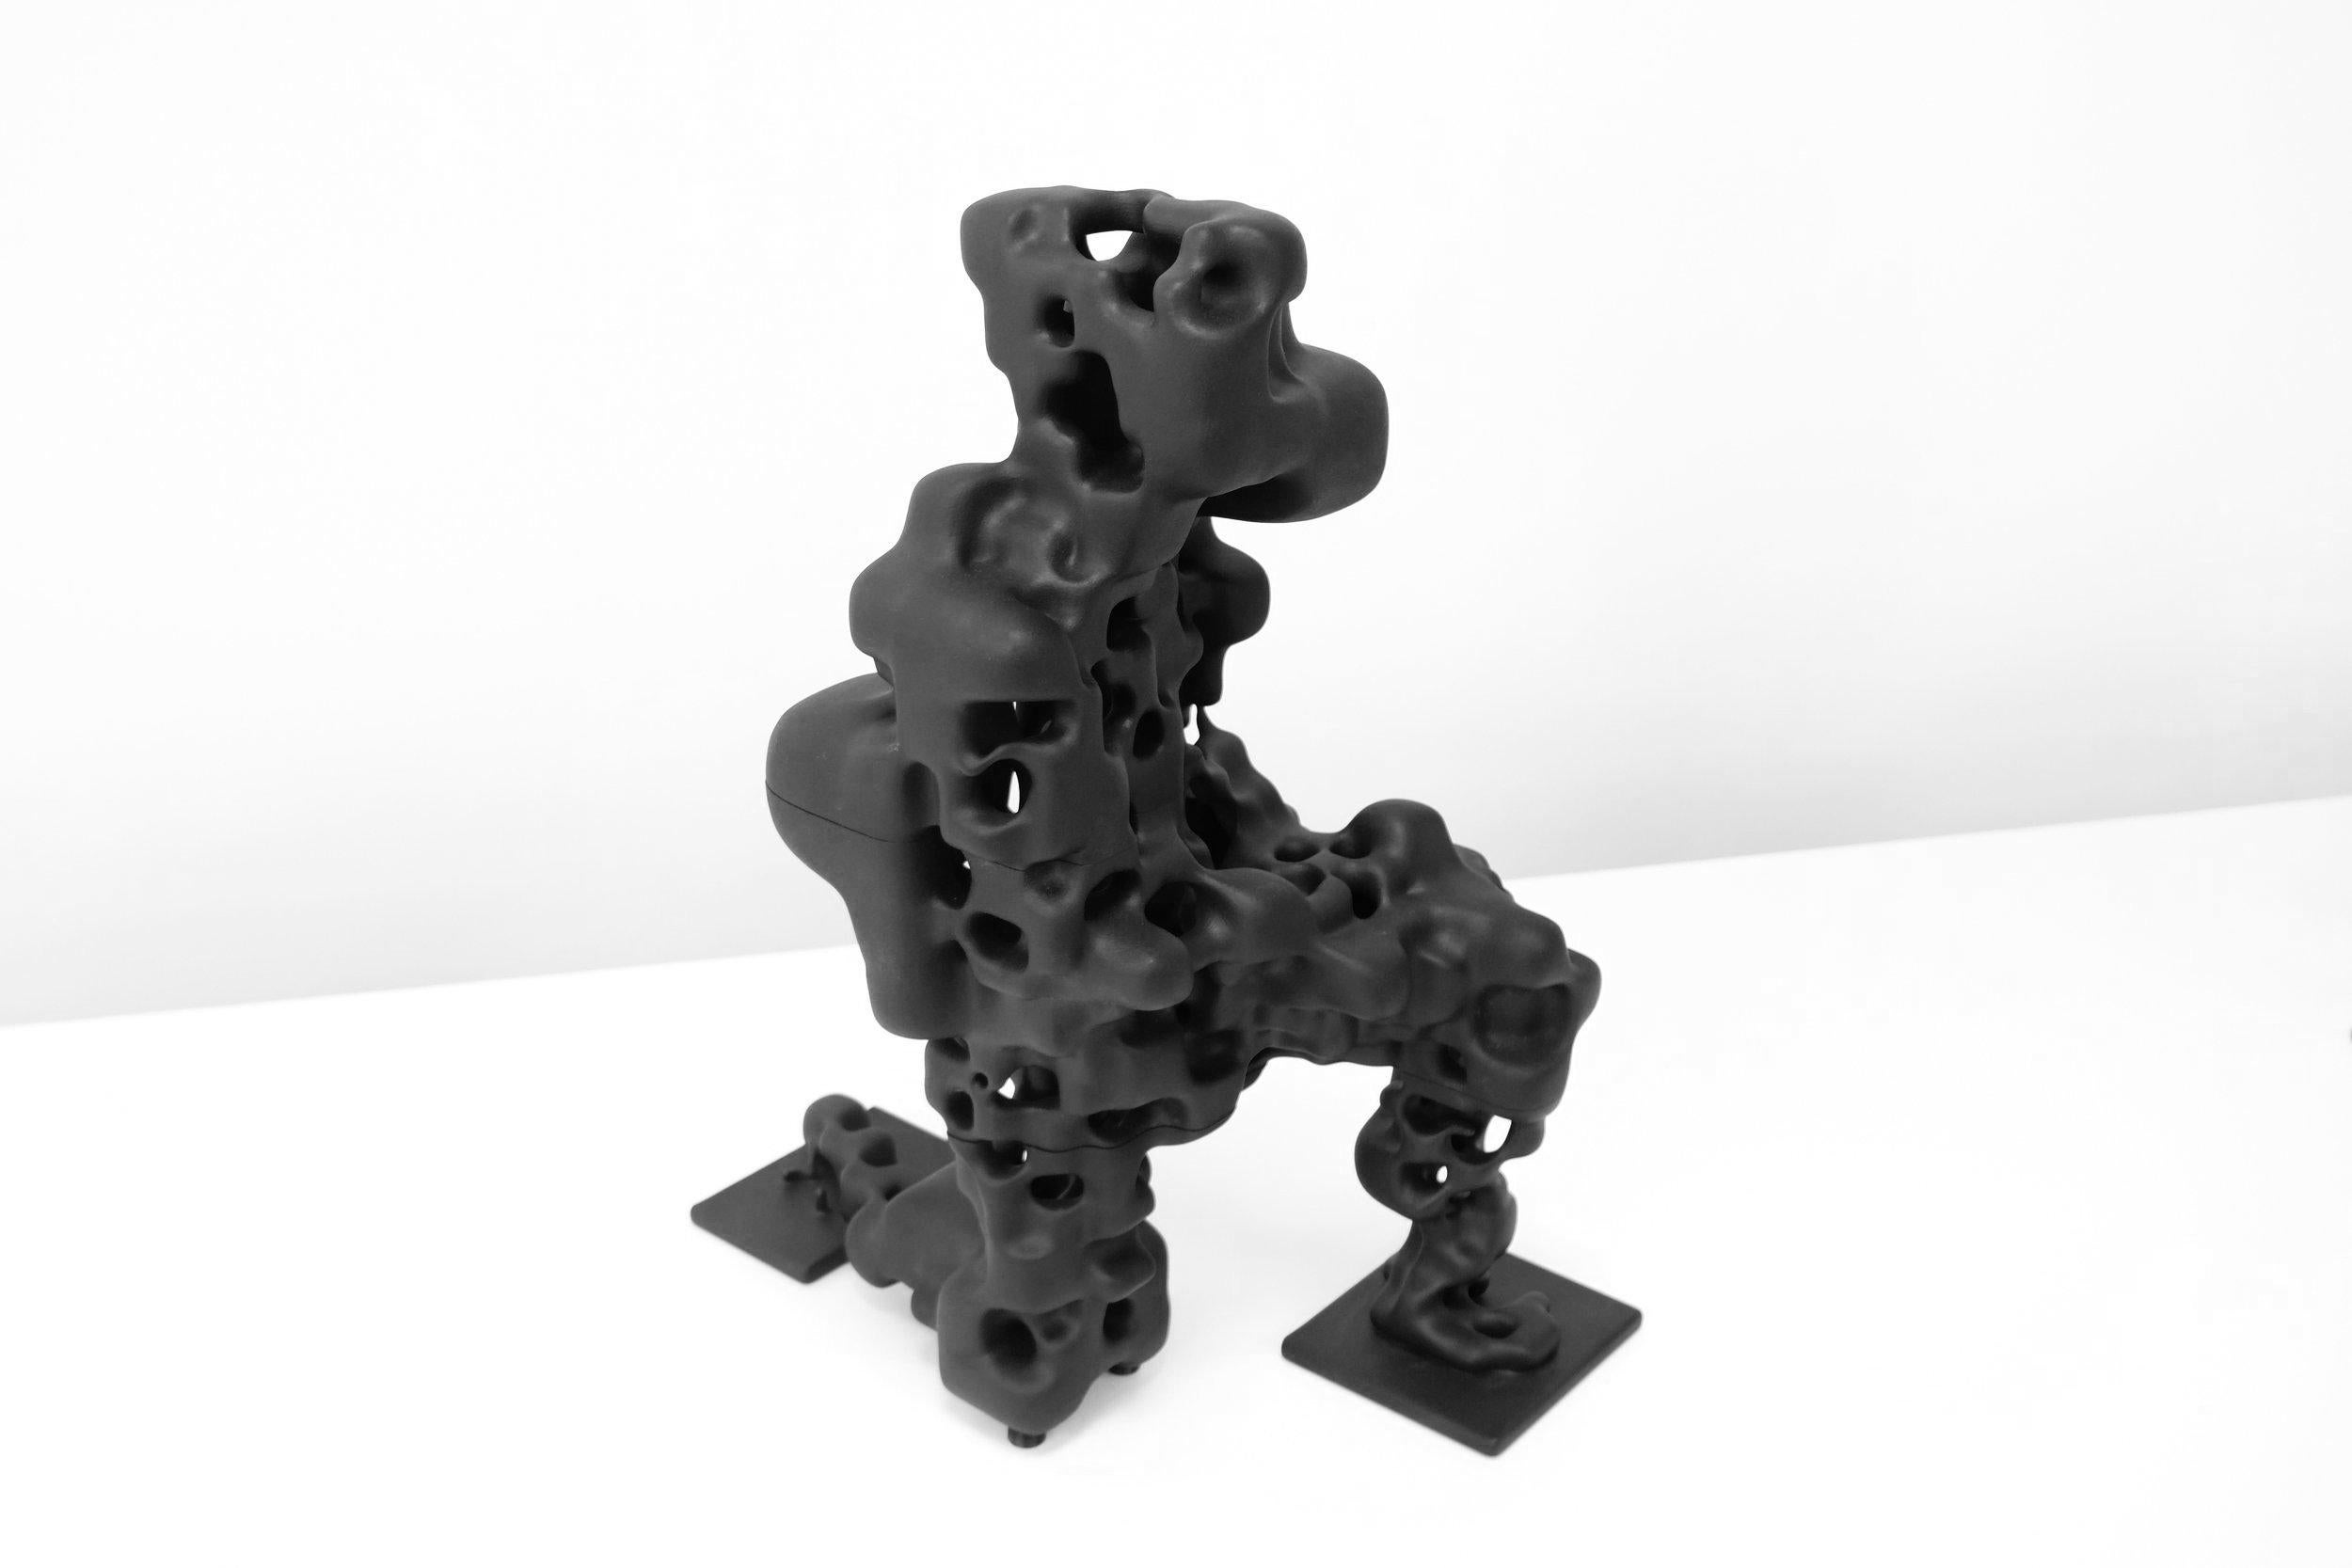 This humanoid sculpture was first created digitally by 3D canning a kneeling human subject through photogrammetry and then passing the scan through generative algorithms, after which it was fabricated with recycled Nylon PA 12 and MJF, or Multi-Jet